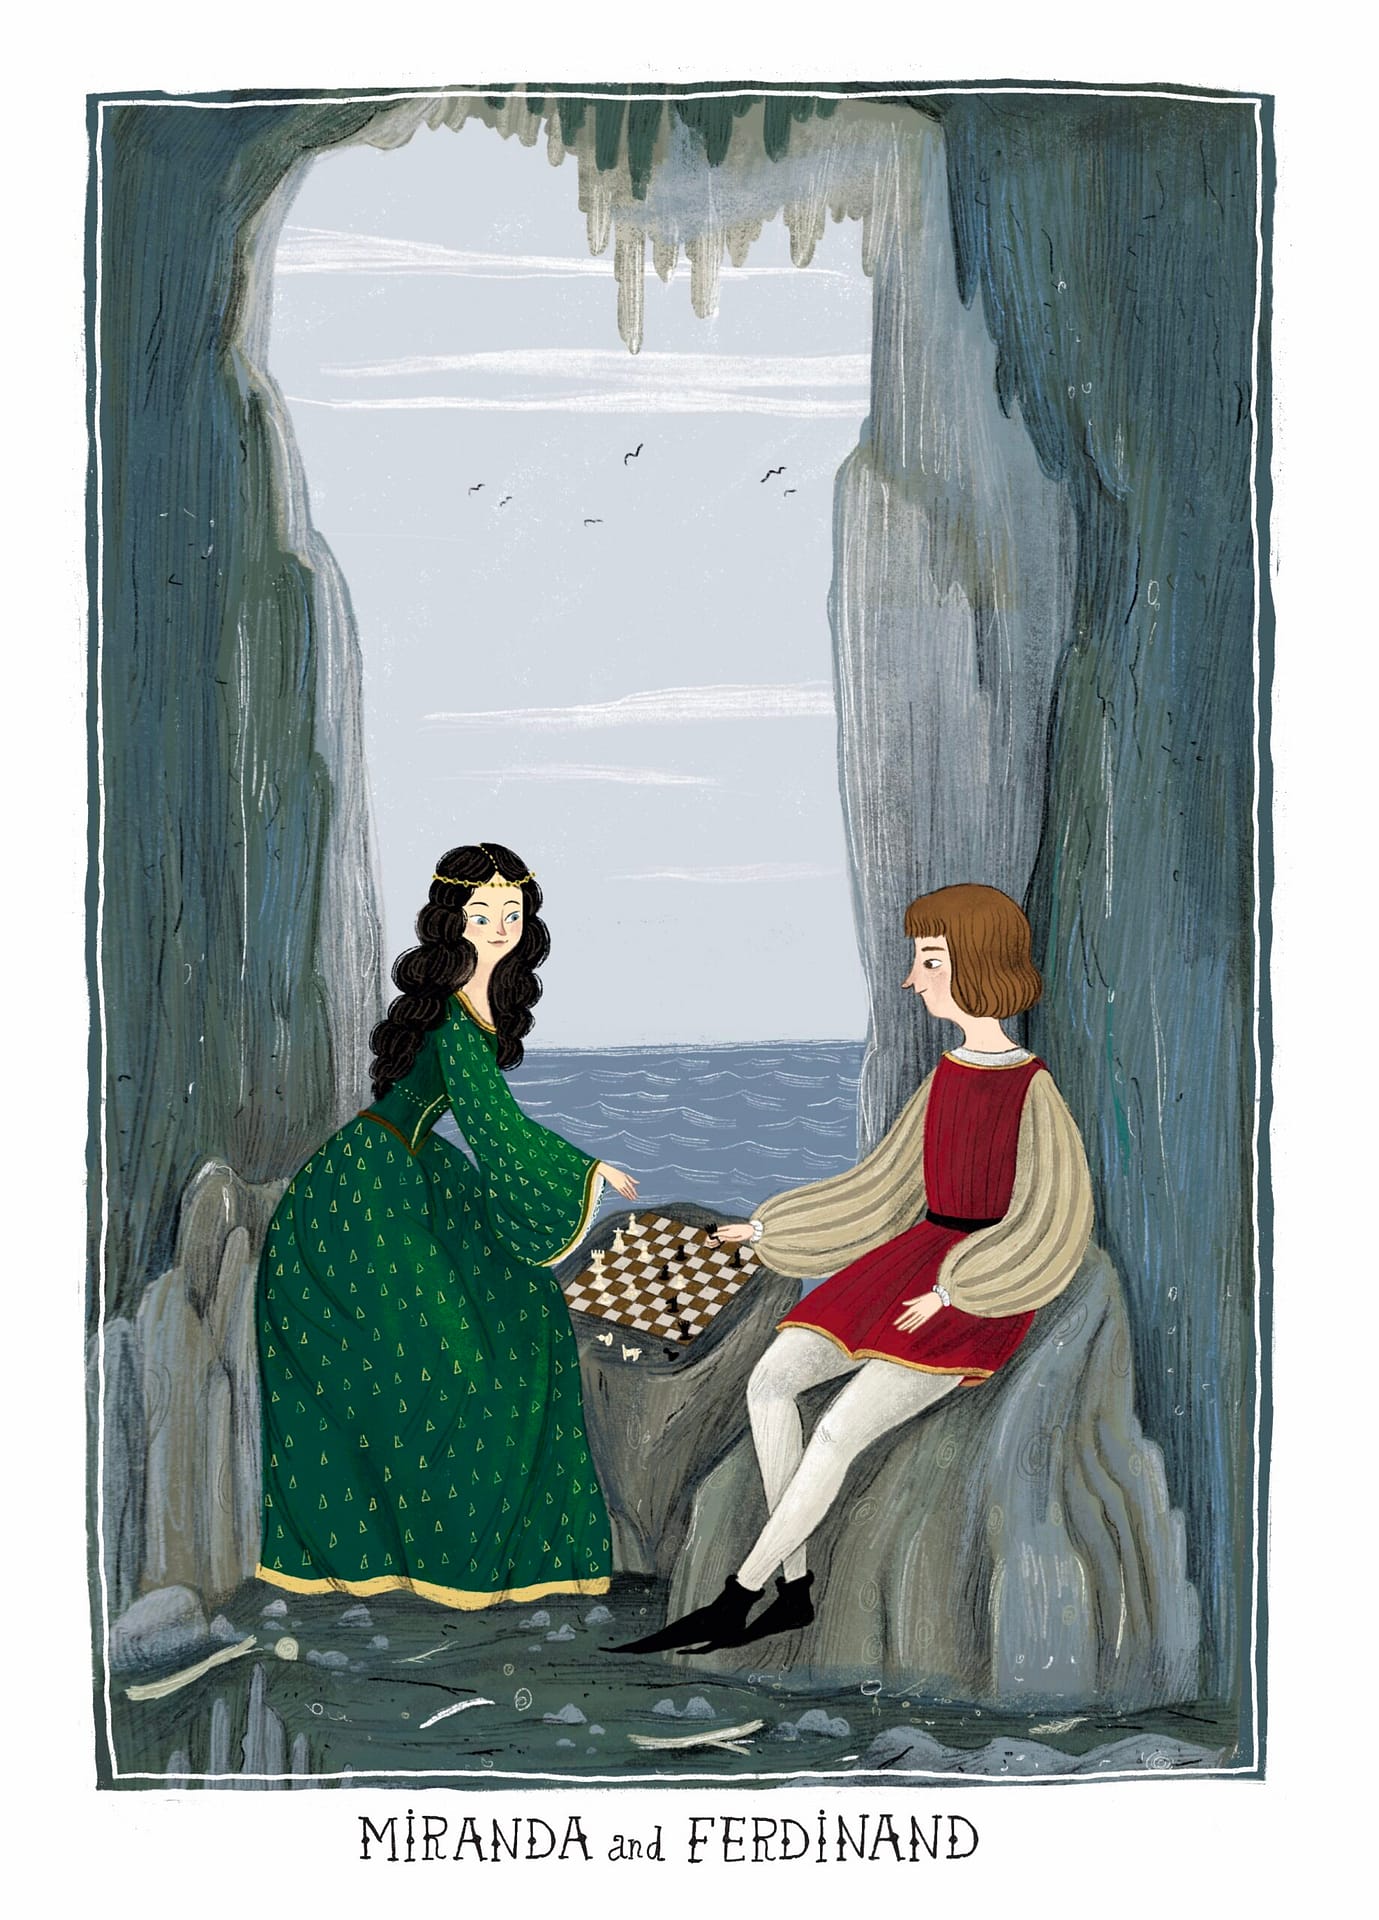 The tempest shakesepeare illustration by Lia Visirin